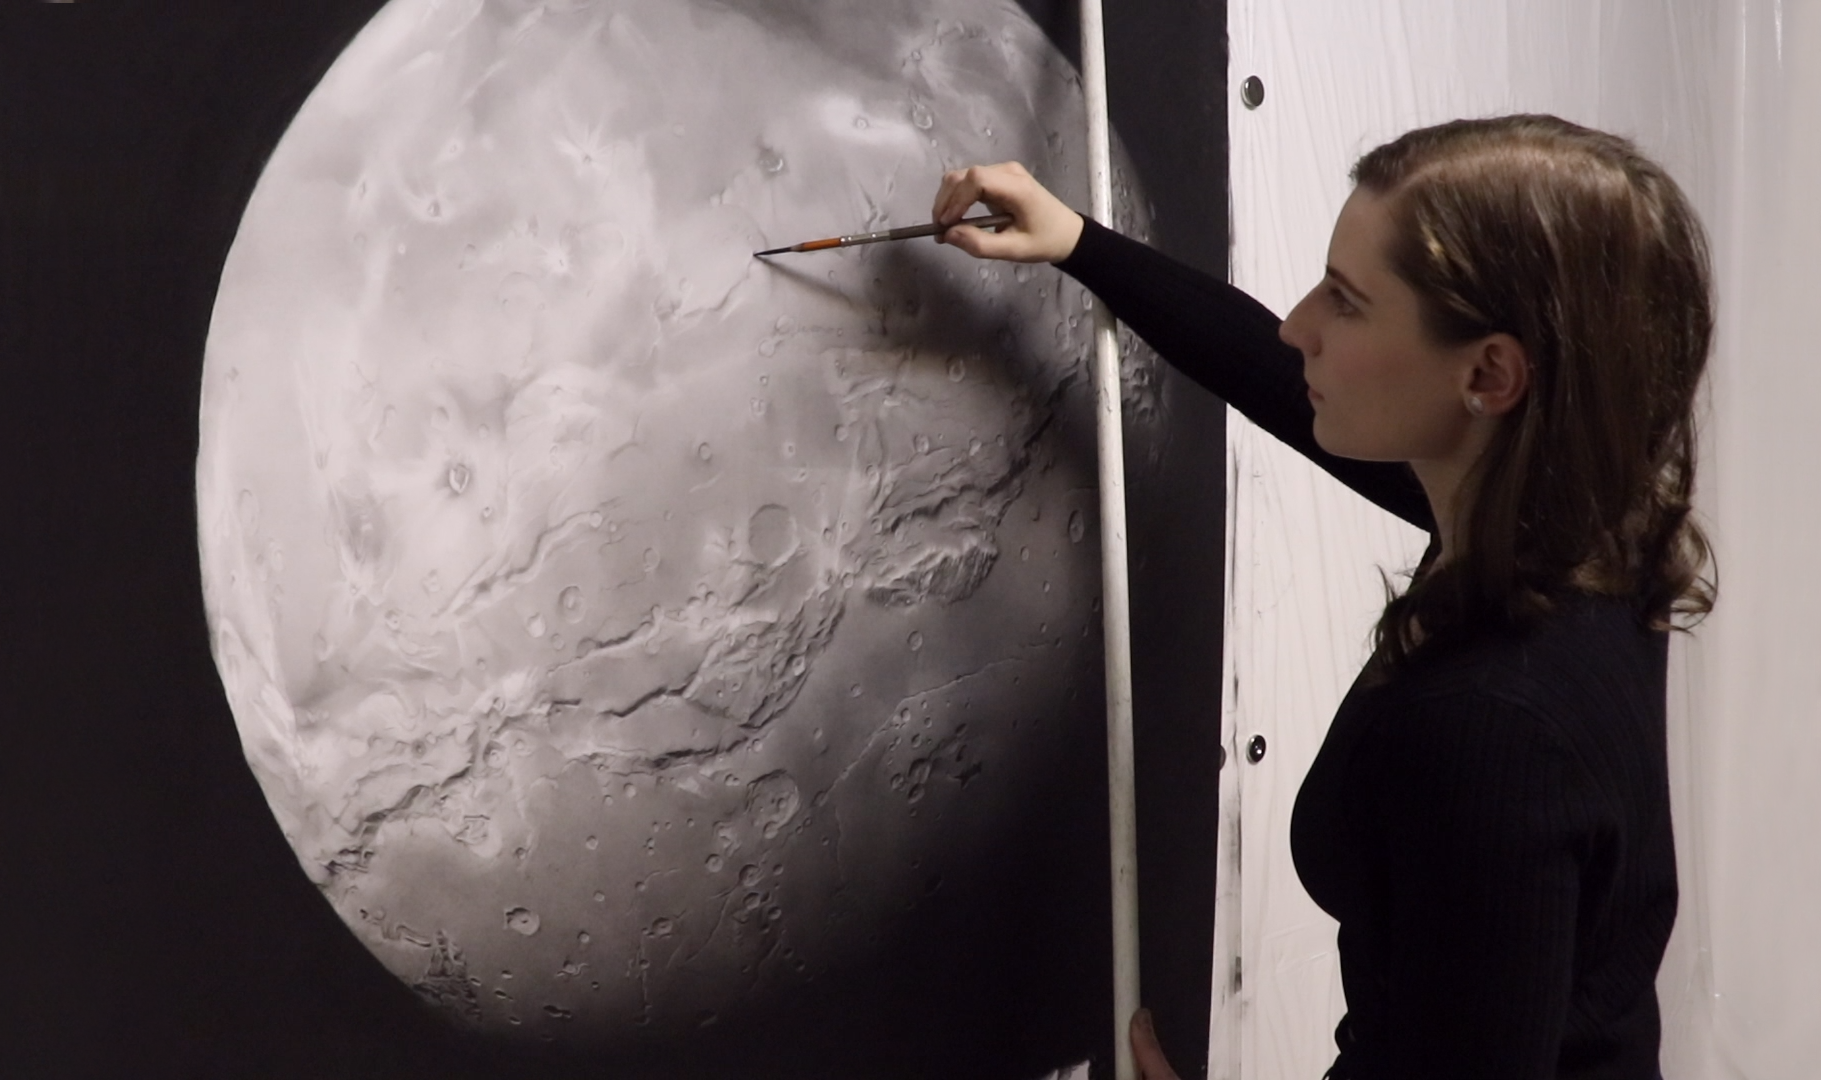 MArina Fridman drawing with a pencil in front of a moon drawing on the wall.